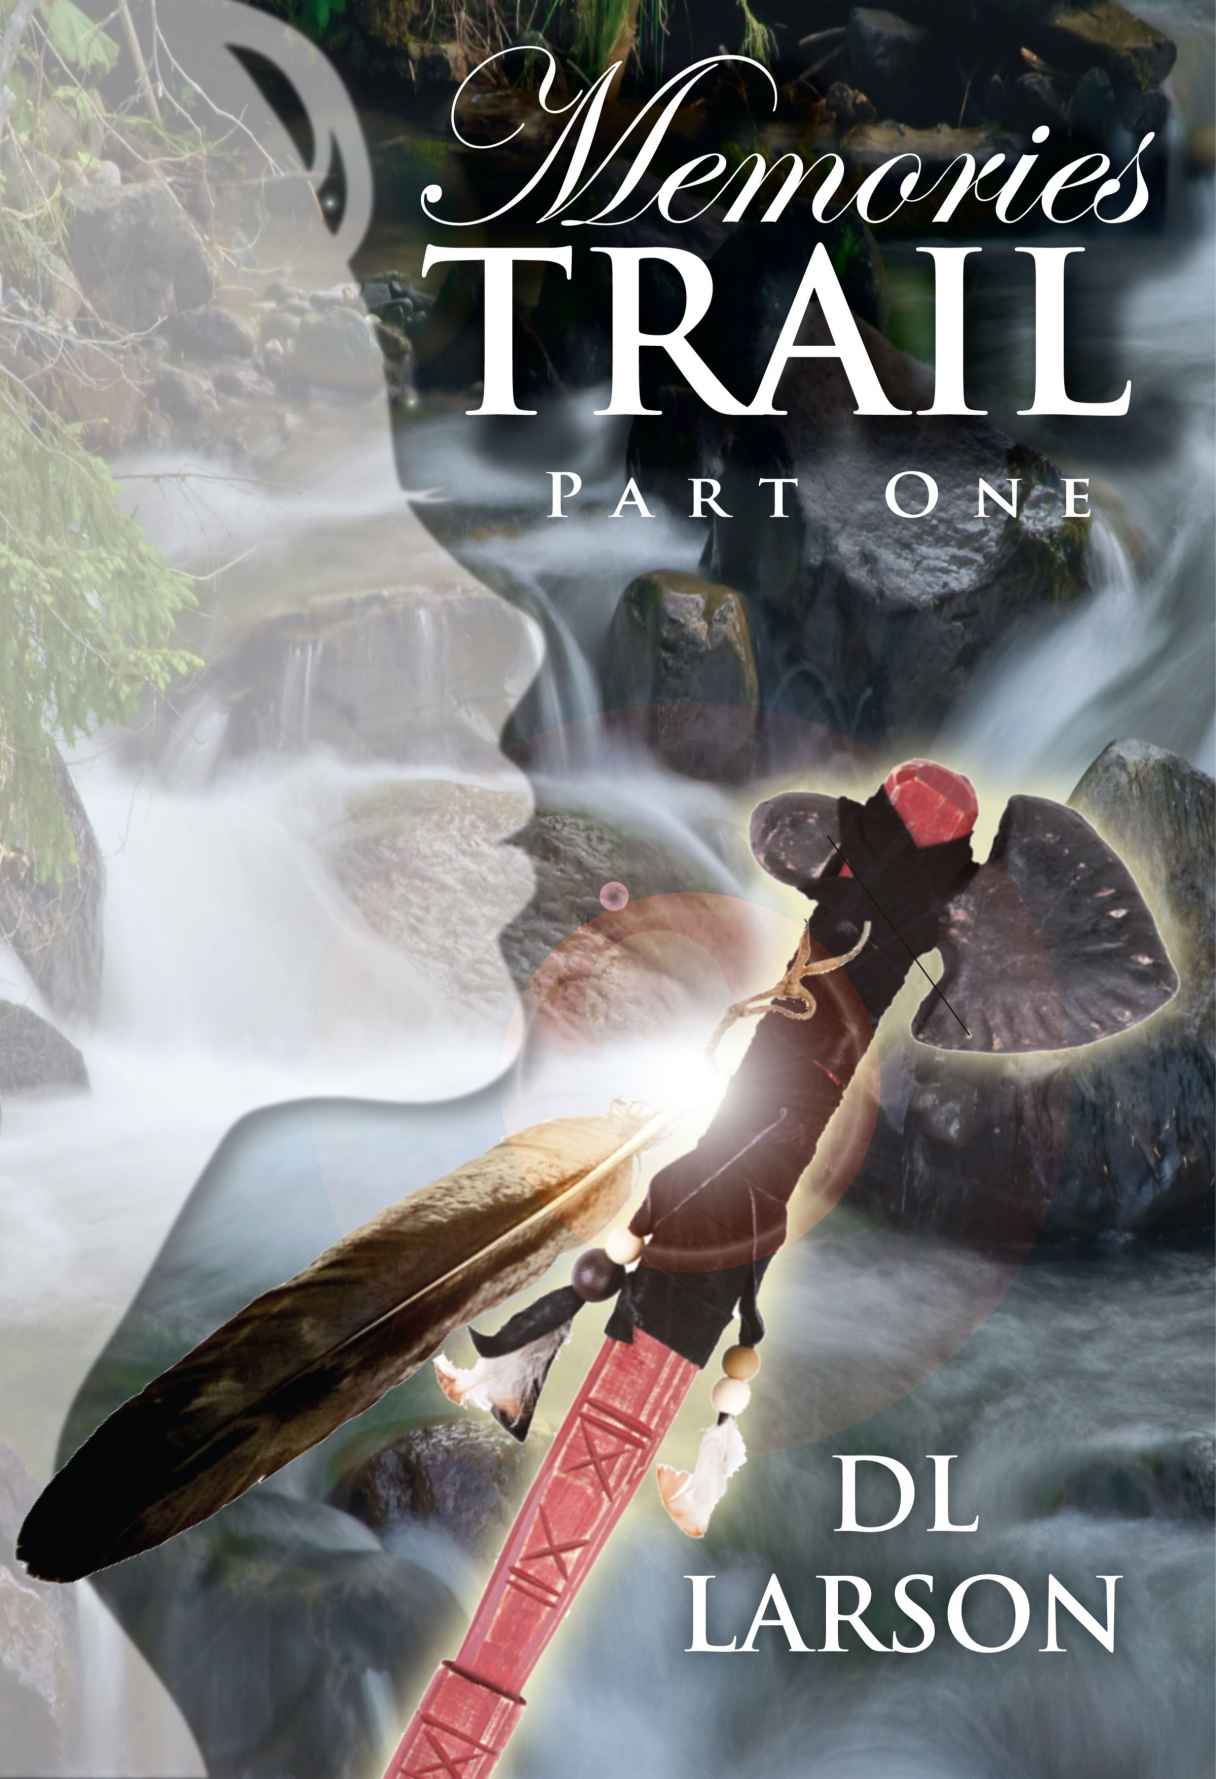 Memories Trail Part One book cover